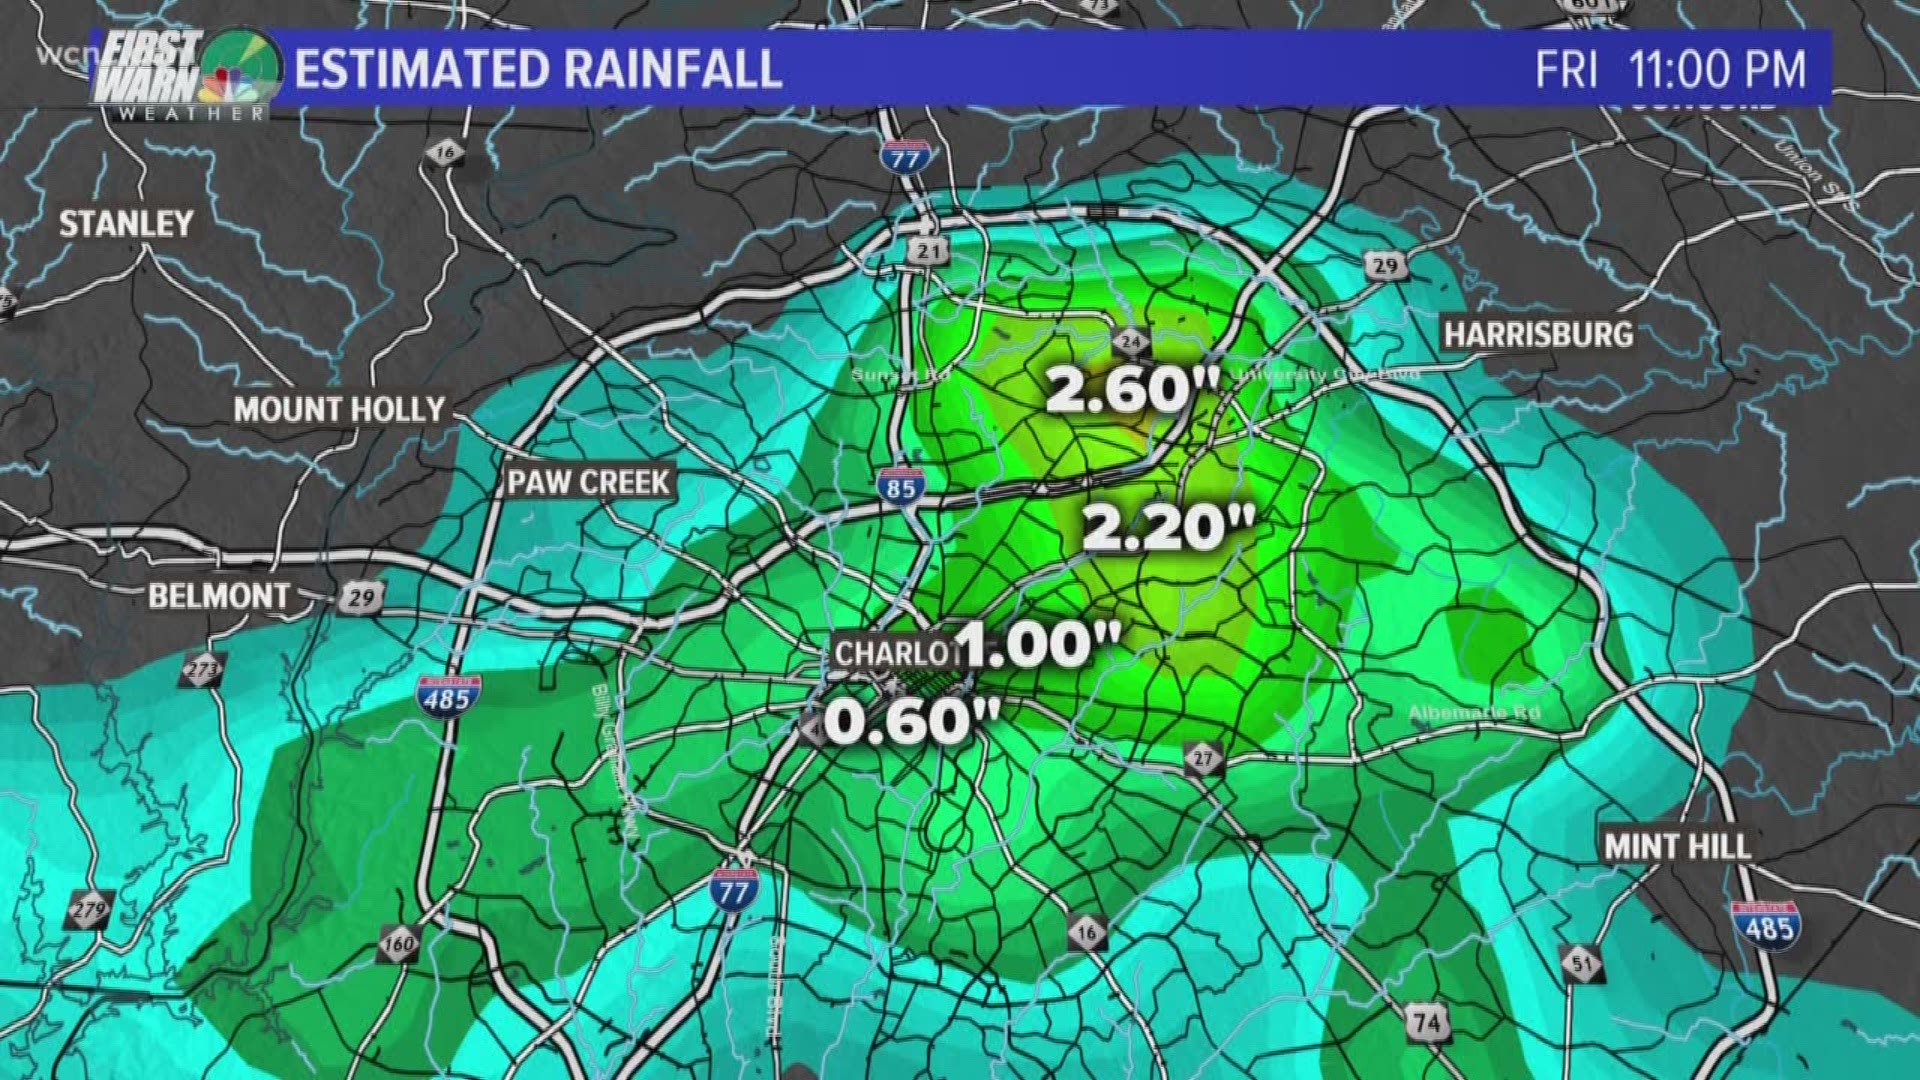 A Flash Flood Warning has been issued for Charlotte because of heavy rainfall accumulations.